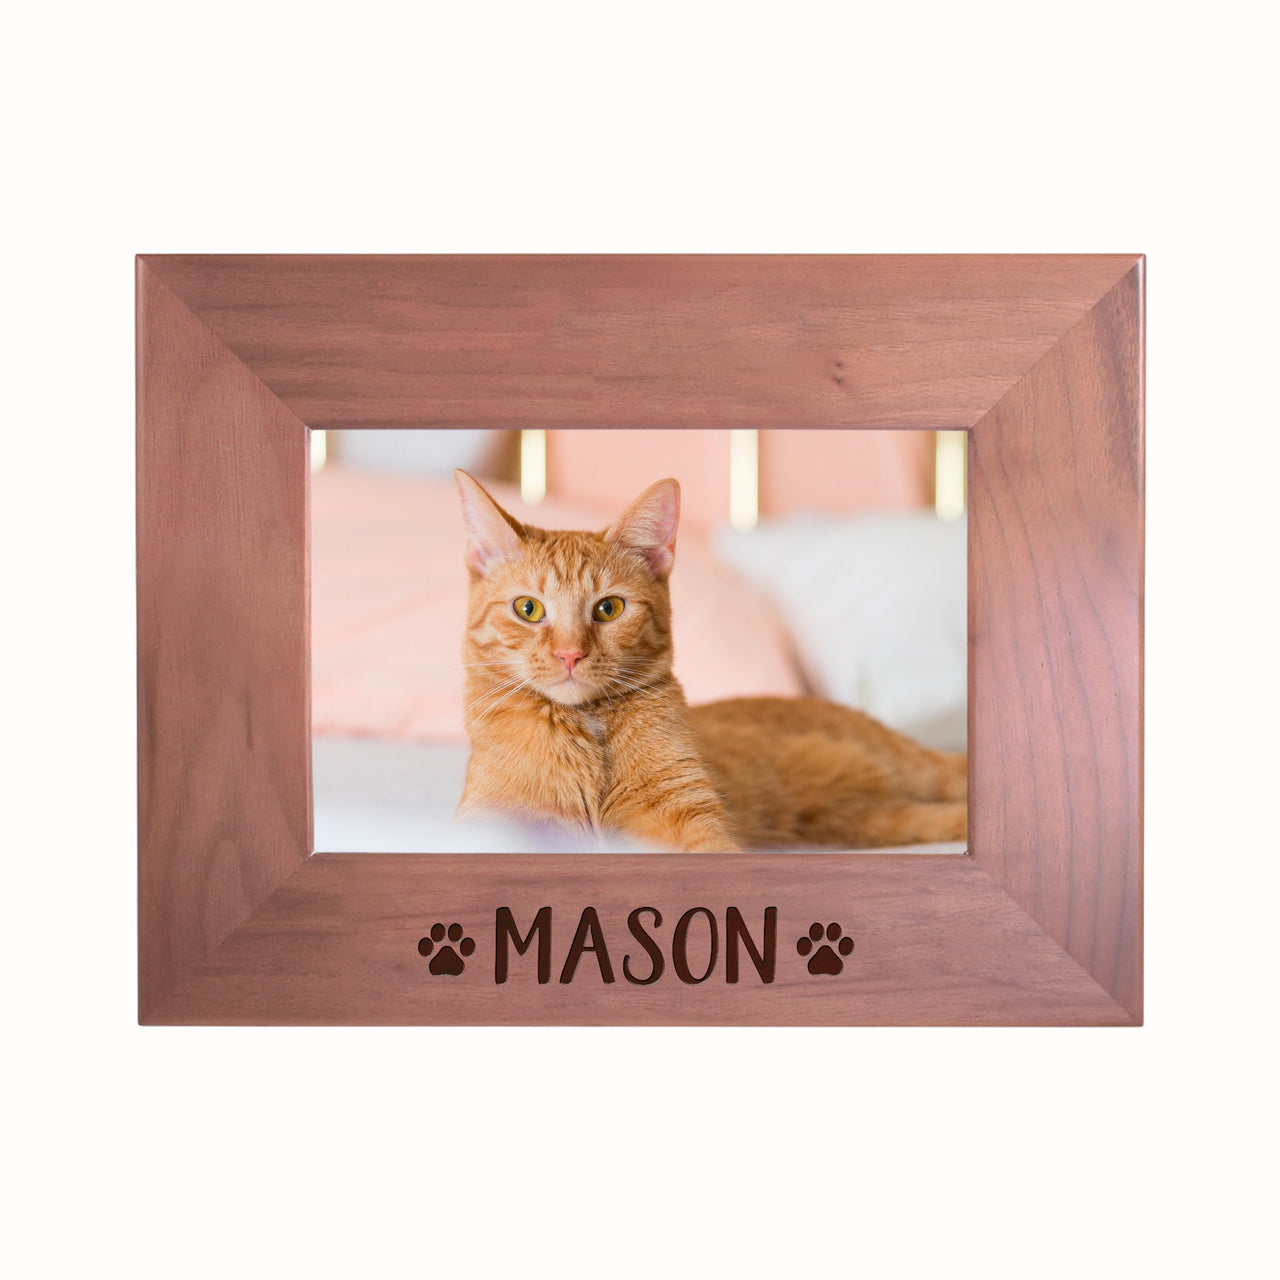 Personalized Walnut Picture Frame for Cats - Mod Peach